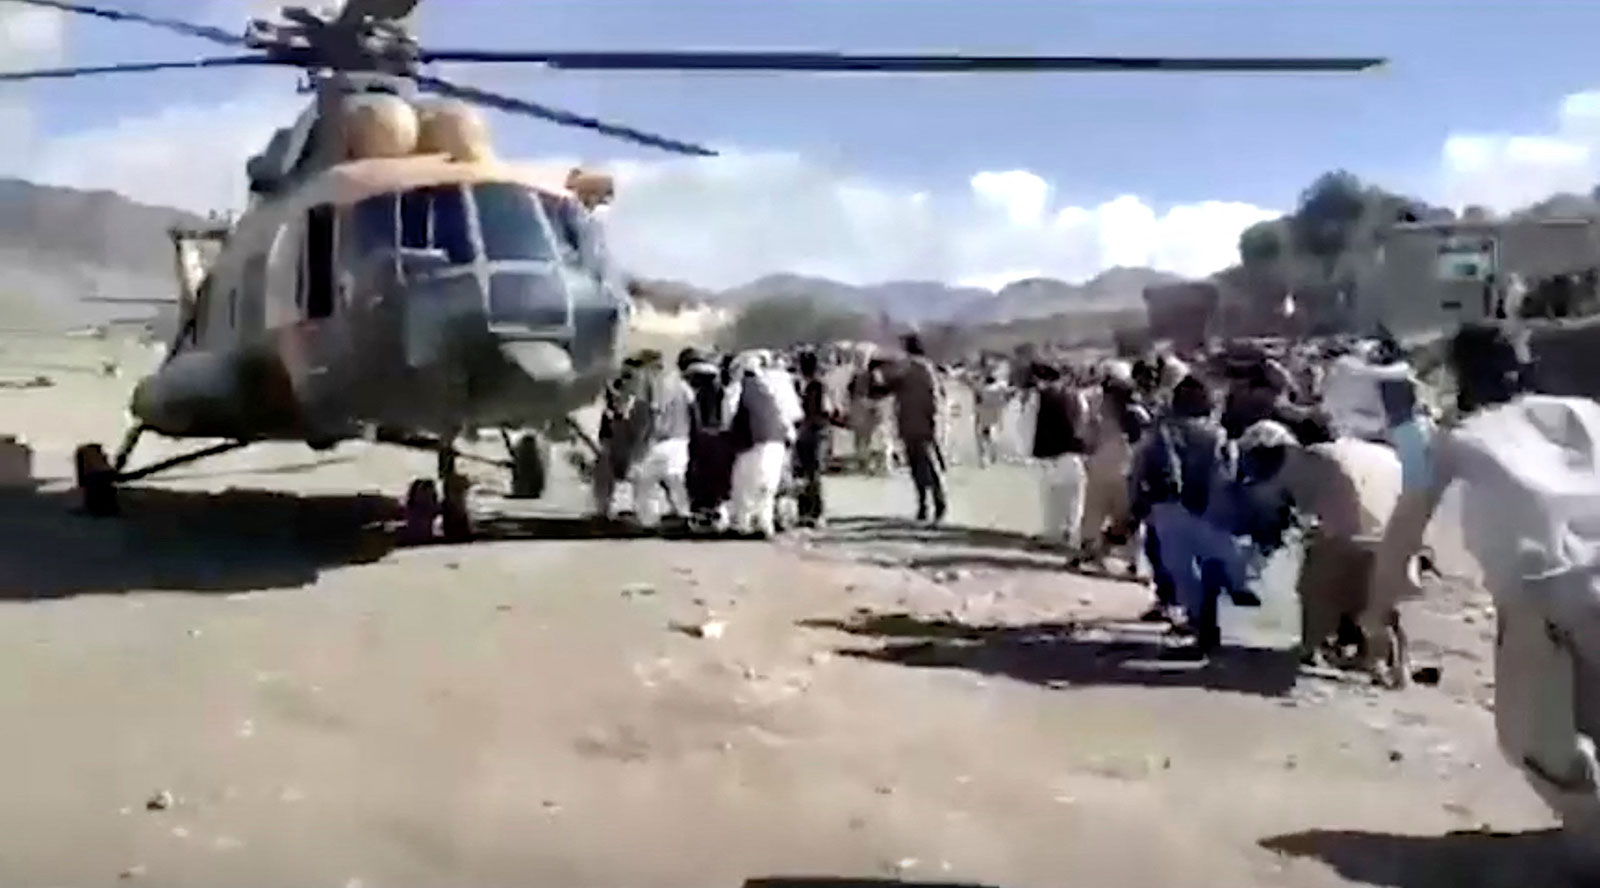 People carry the injured to a helicopter following a massive earthquake in Paktika province, Afghanistan, on June 22 in this screen grab taken from a video.